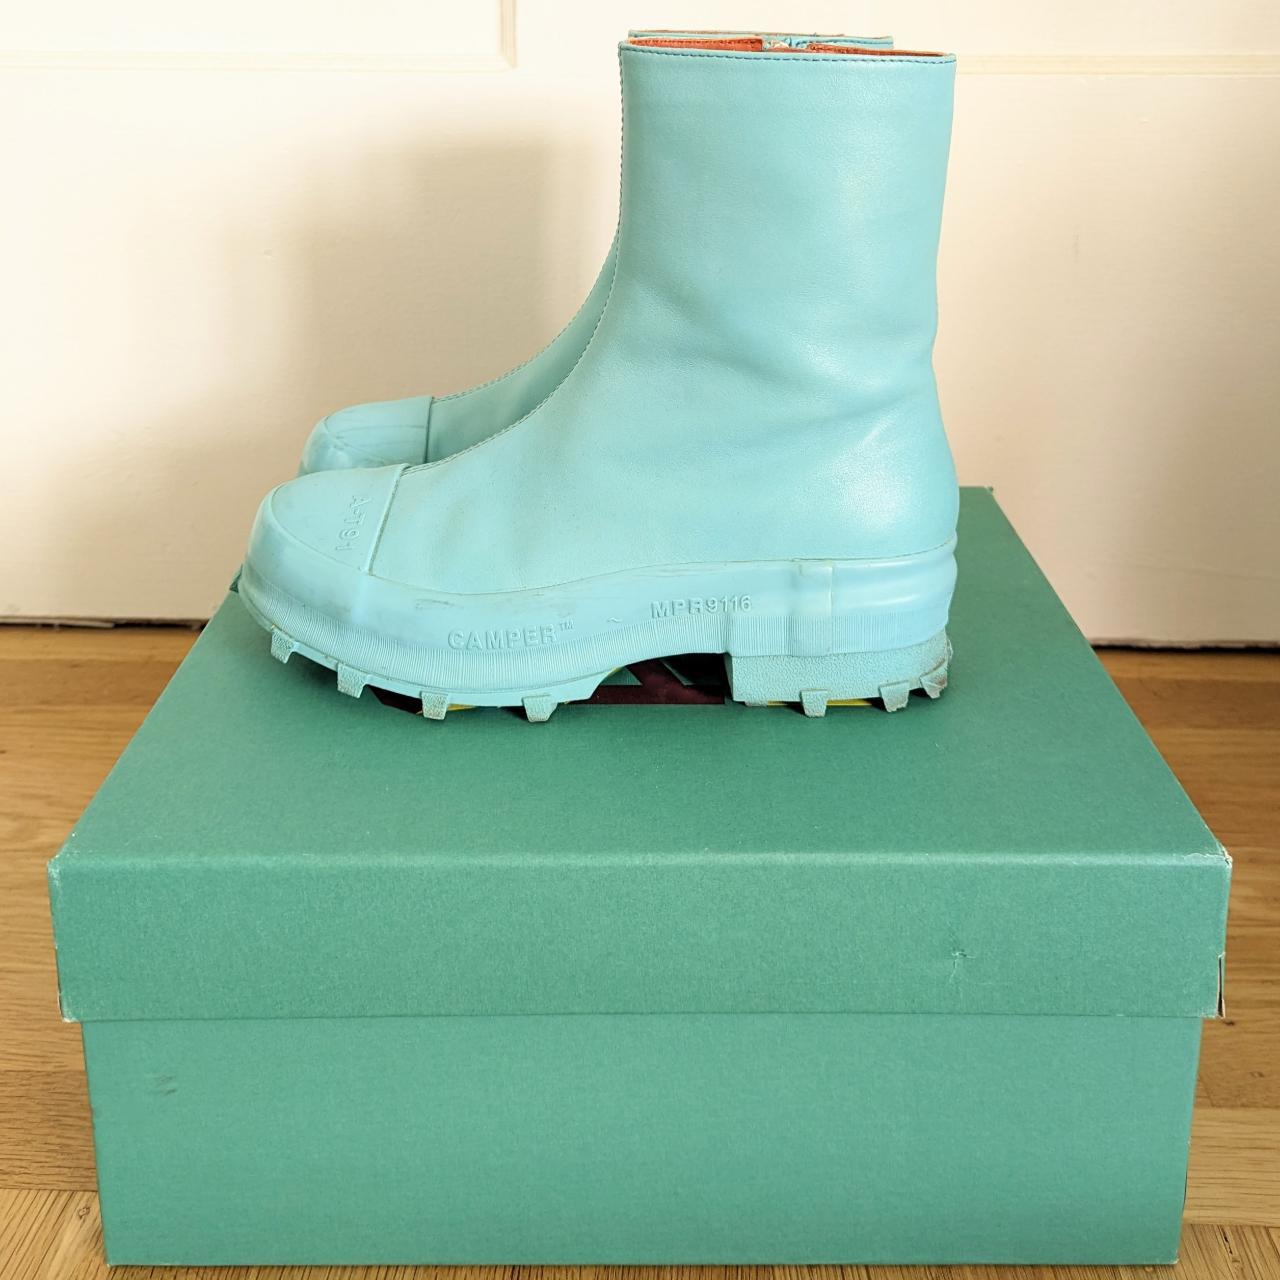 CamperLab Women's Green and Blue Boots